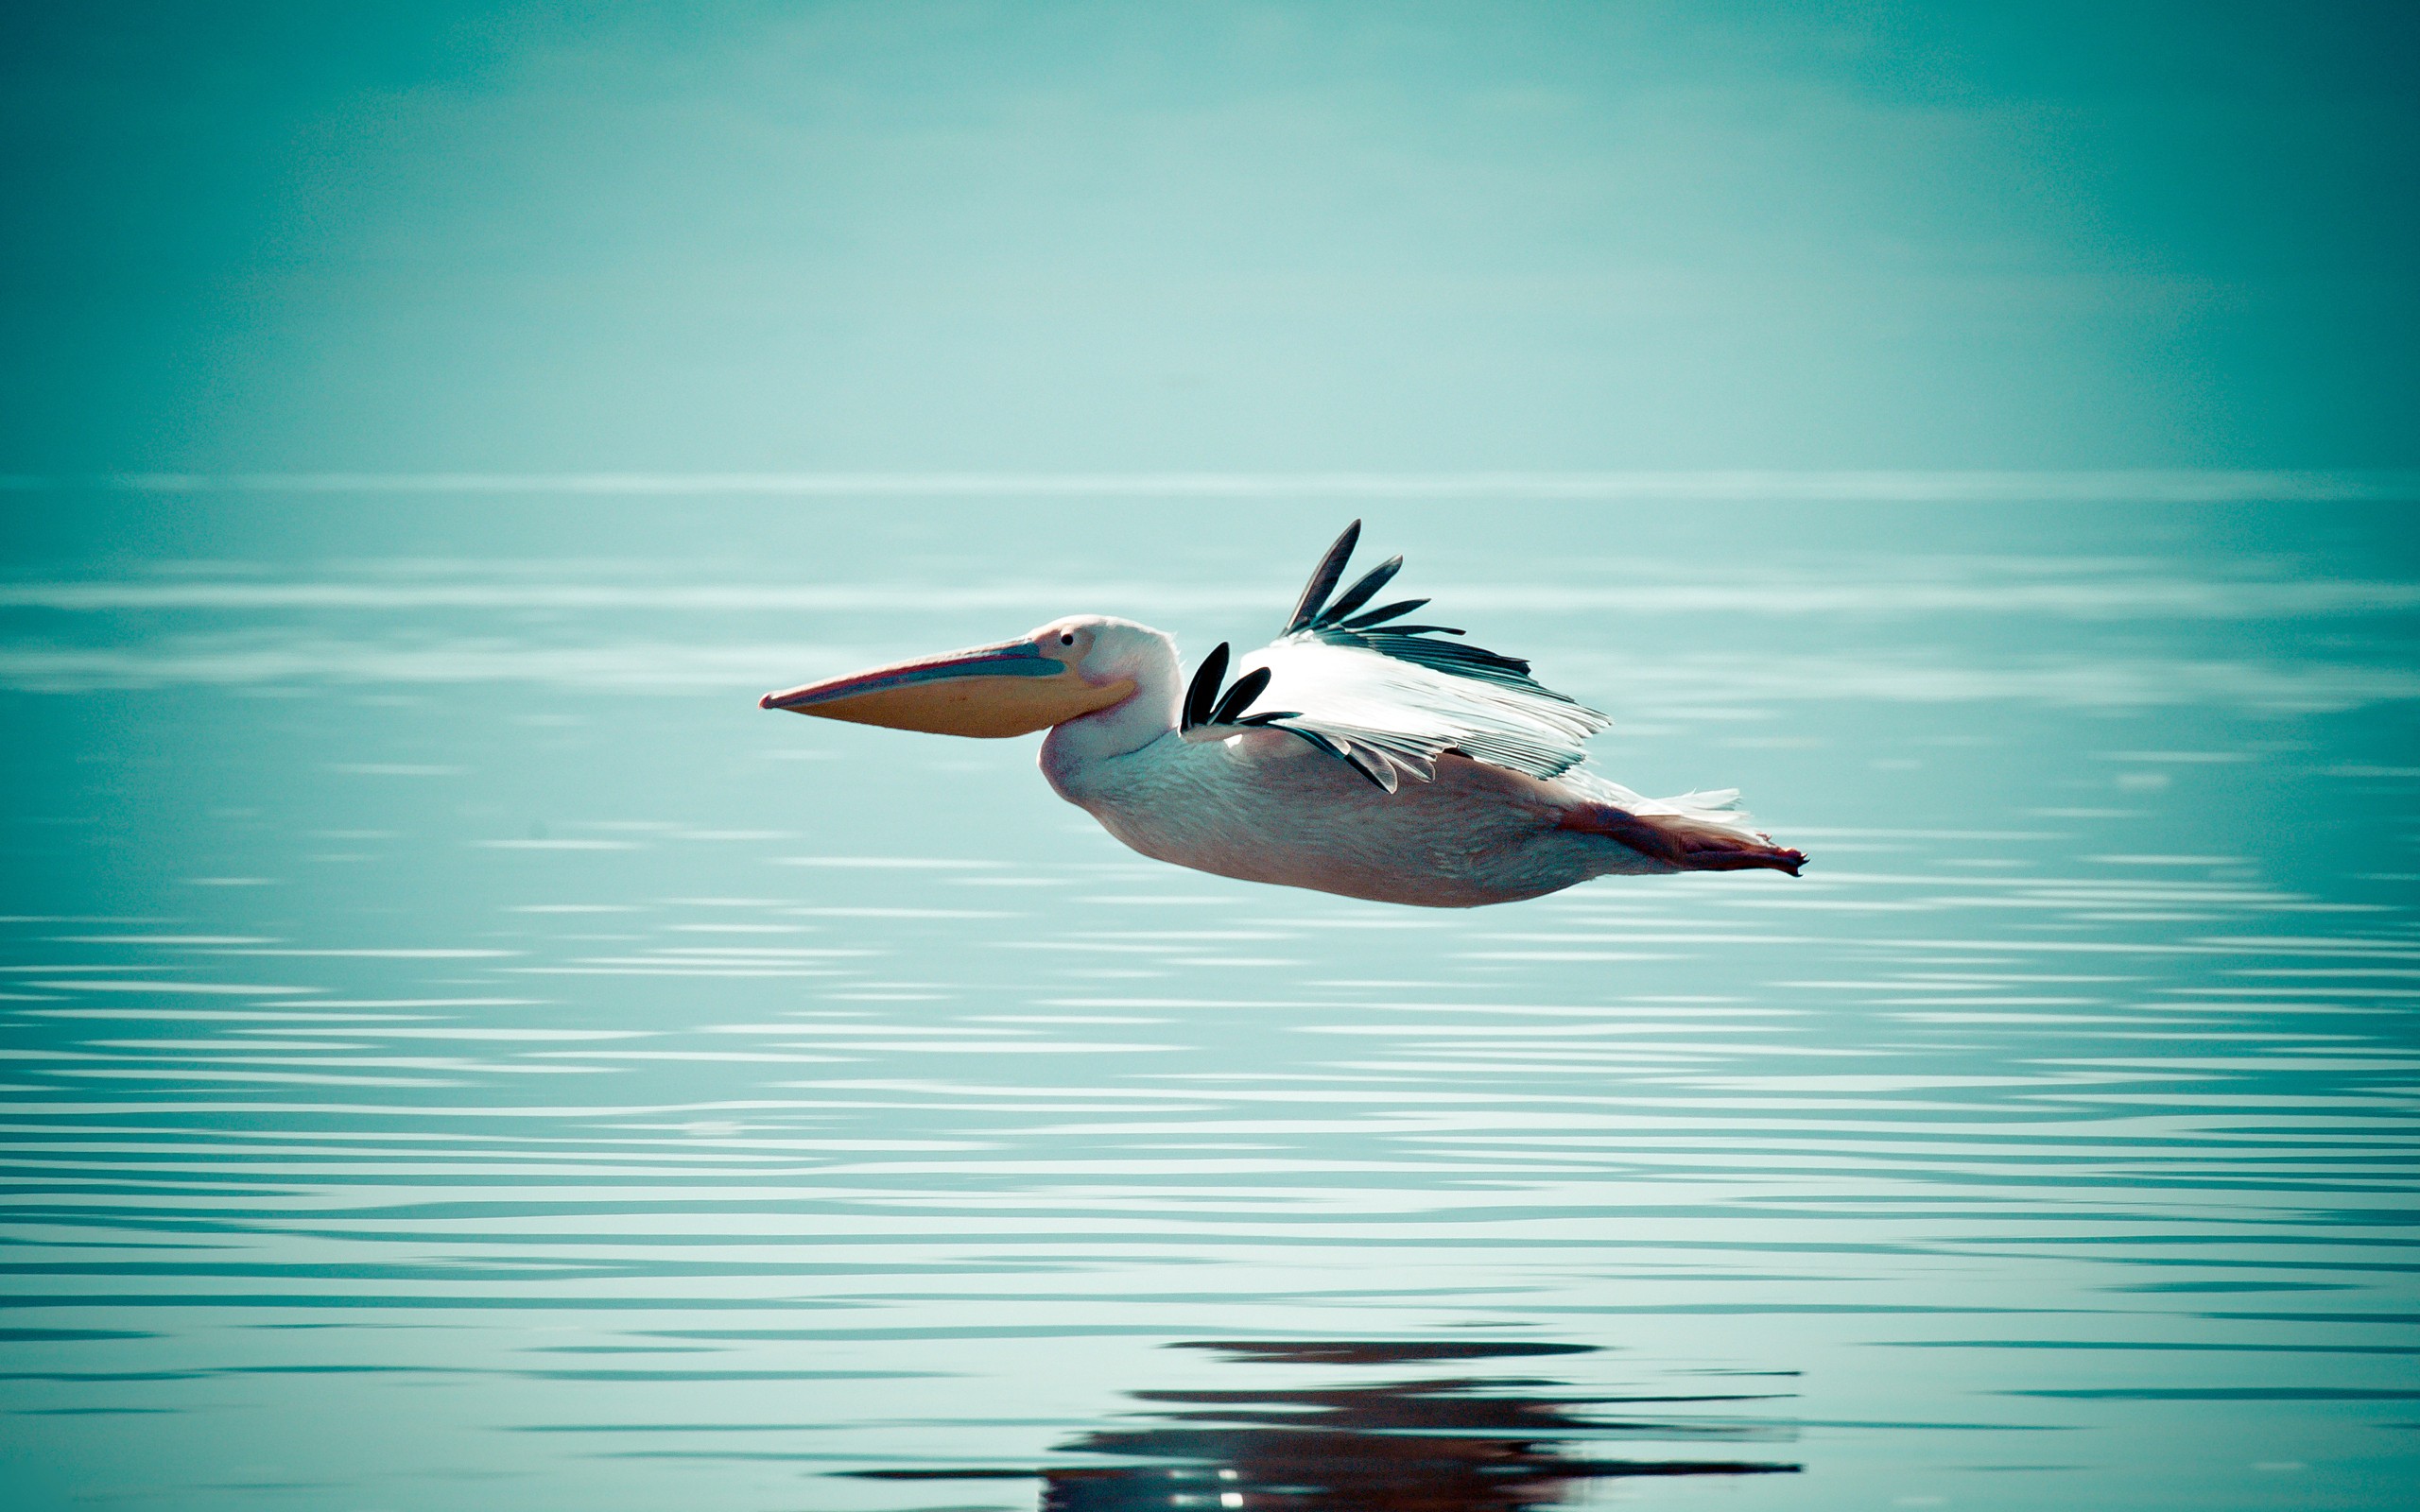 General 2560x1600 nature animals birds water horizon pelicans reflection flying wings feathers